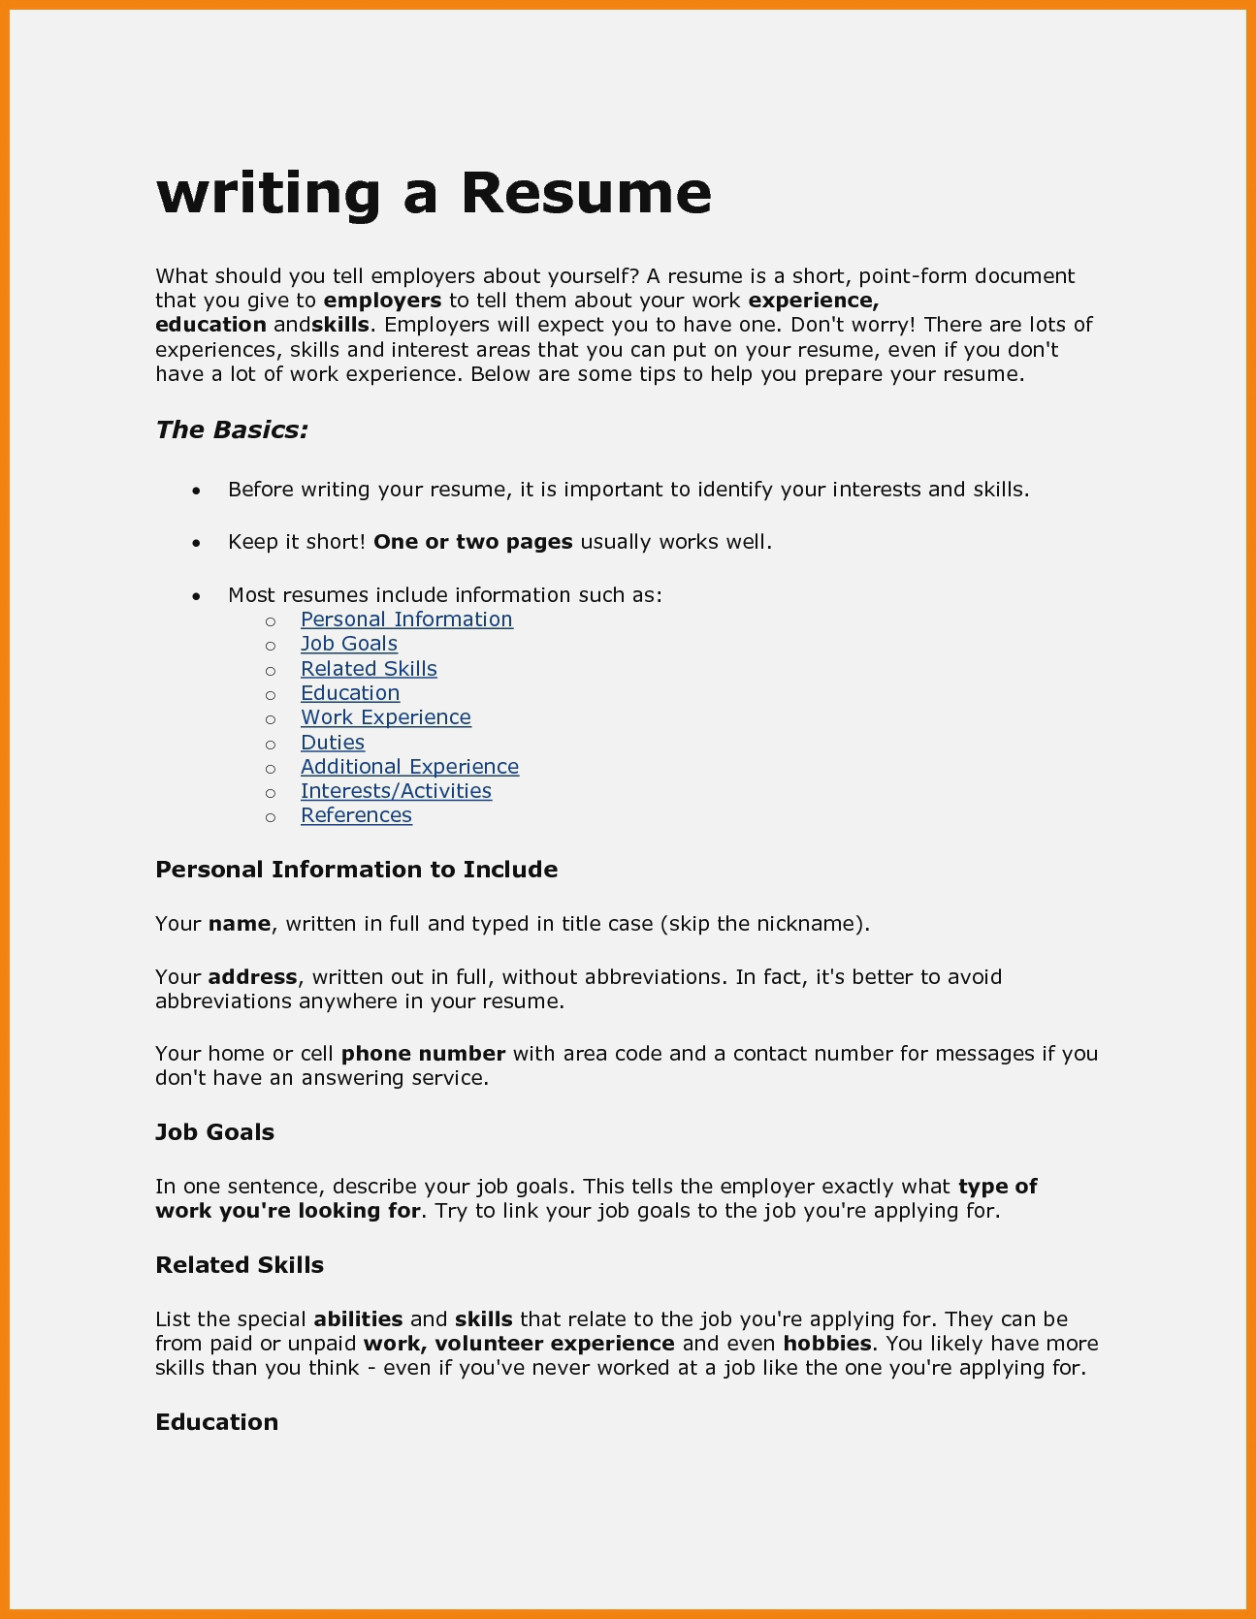 How To Type A Resume Resume How To Write A Resume For A Job High Resolution How To Write Type Of Resume For Job how to type a resume|wikiresume.com